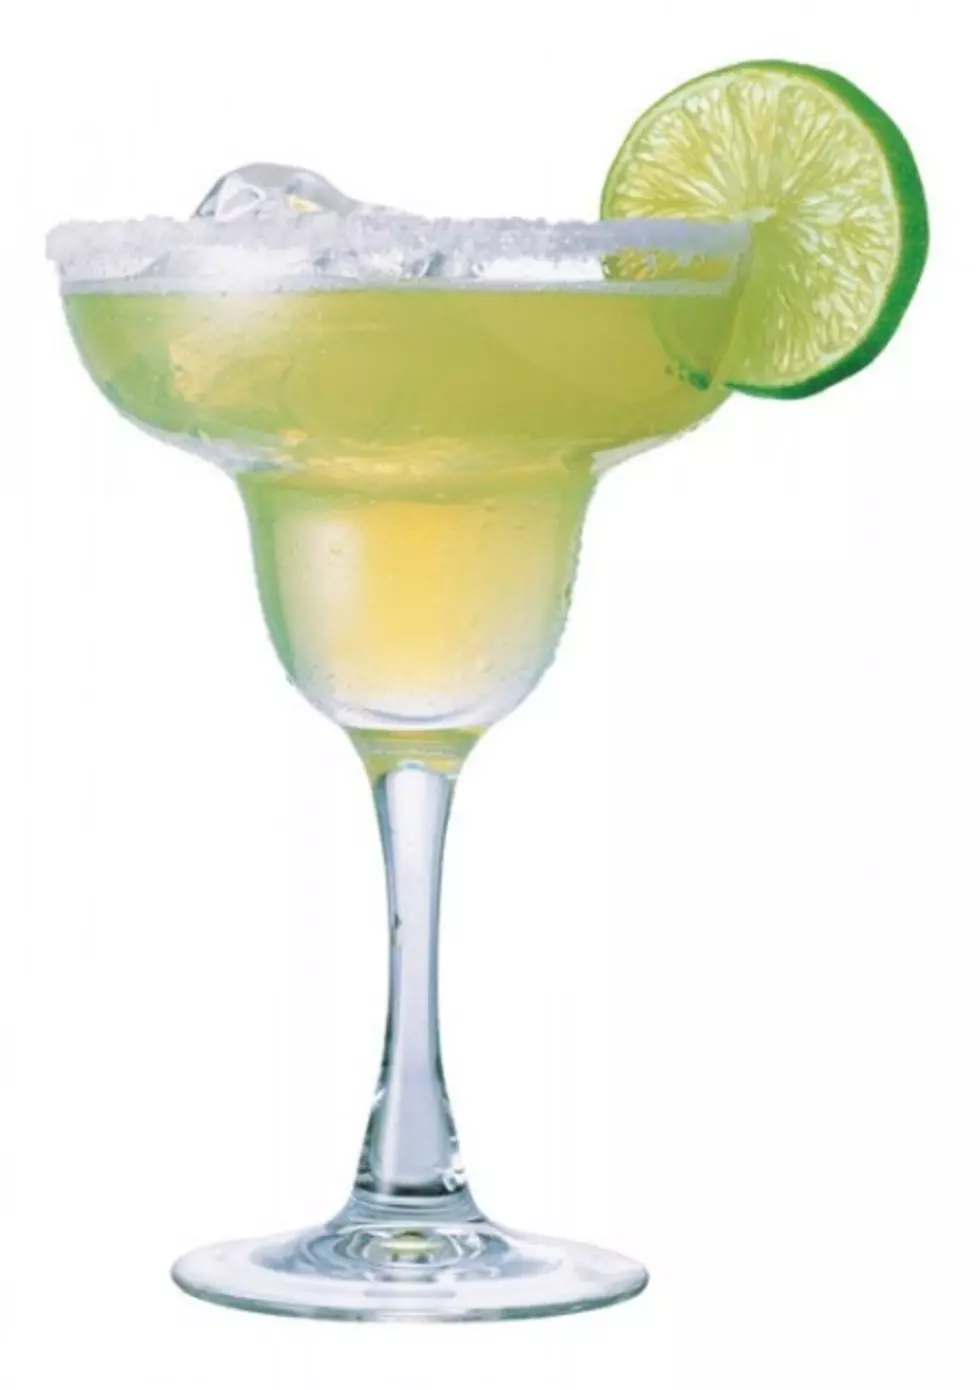 Certain Allergy May Ruin Your Summer Love Affair With The Margarita!